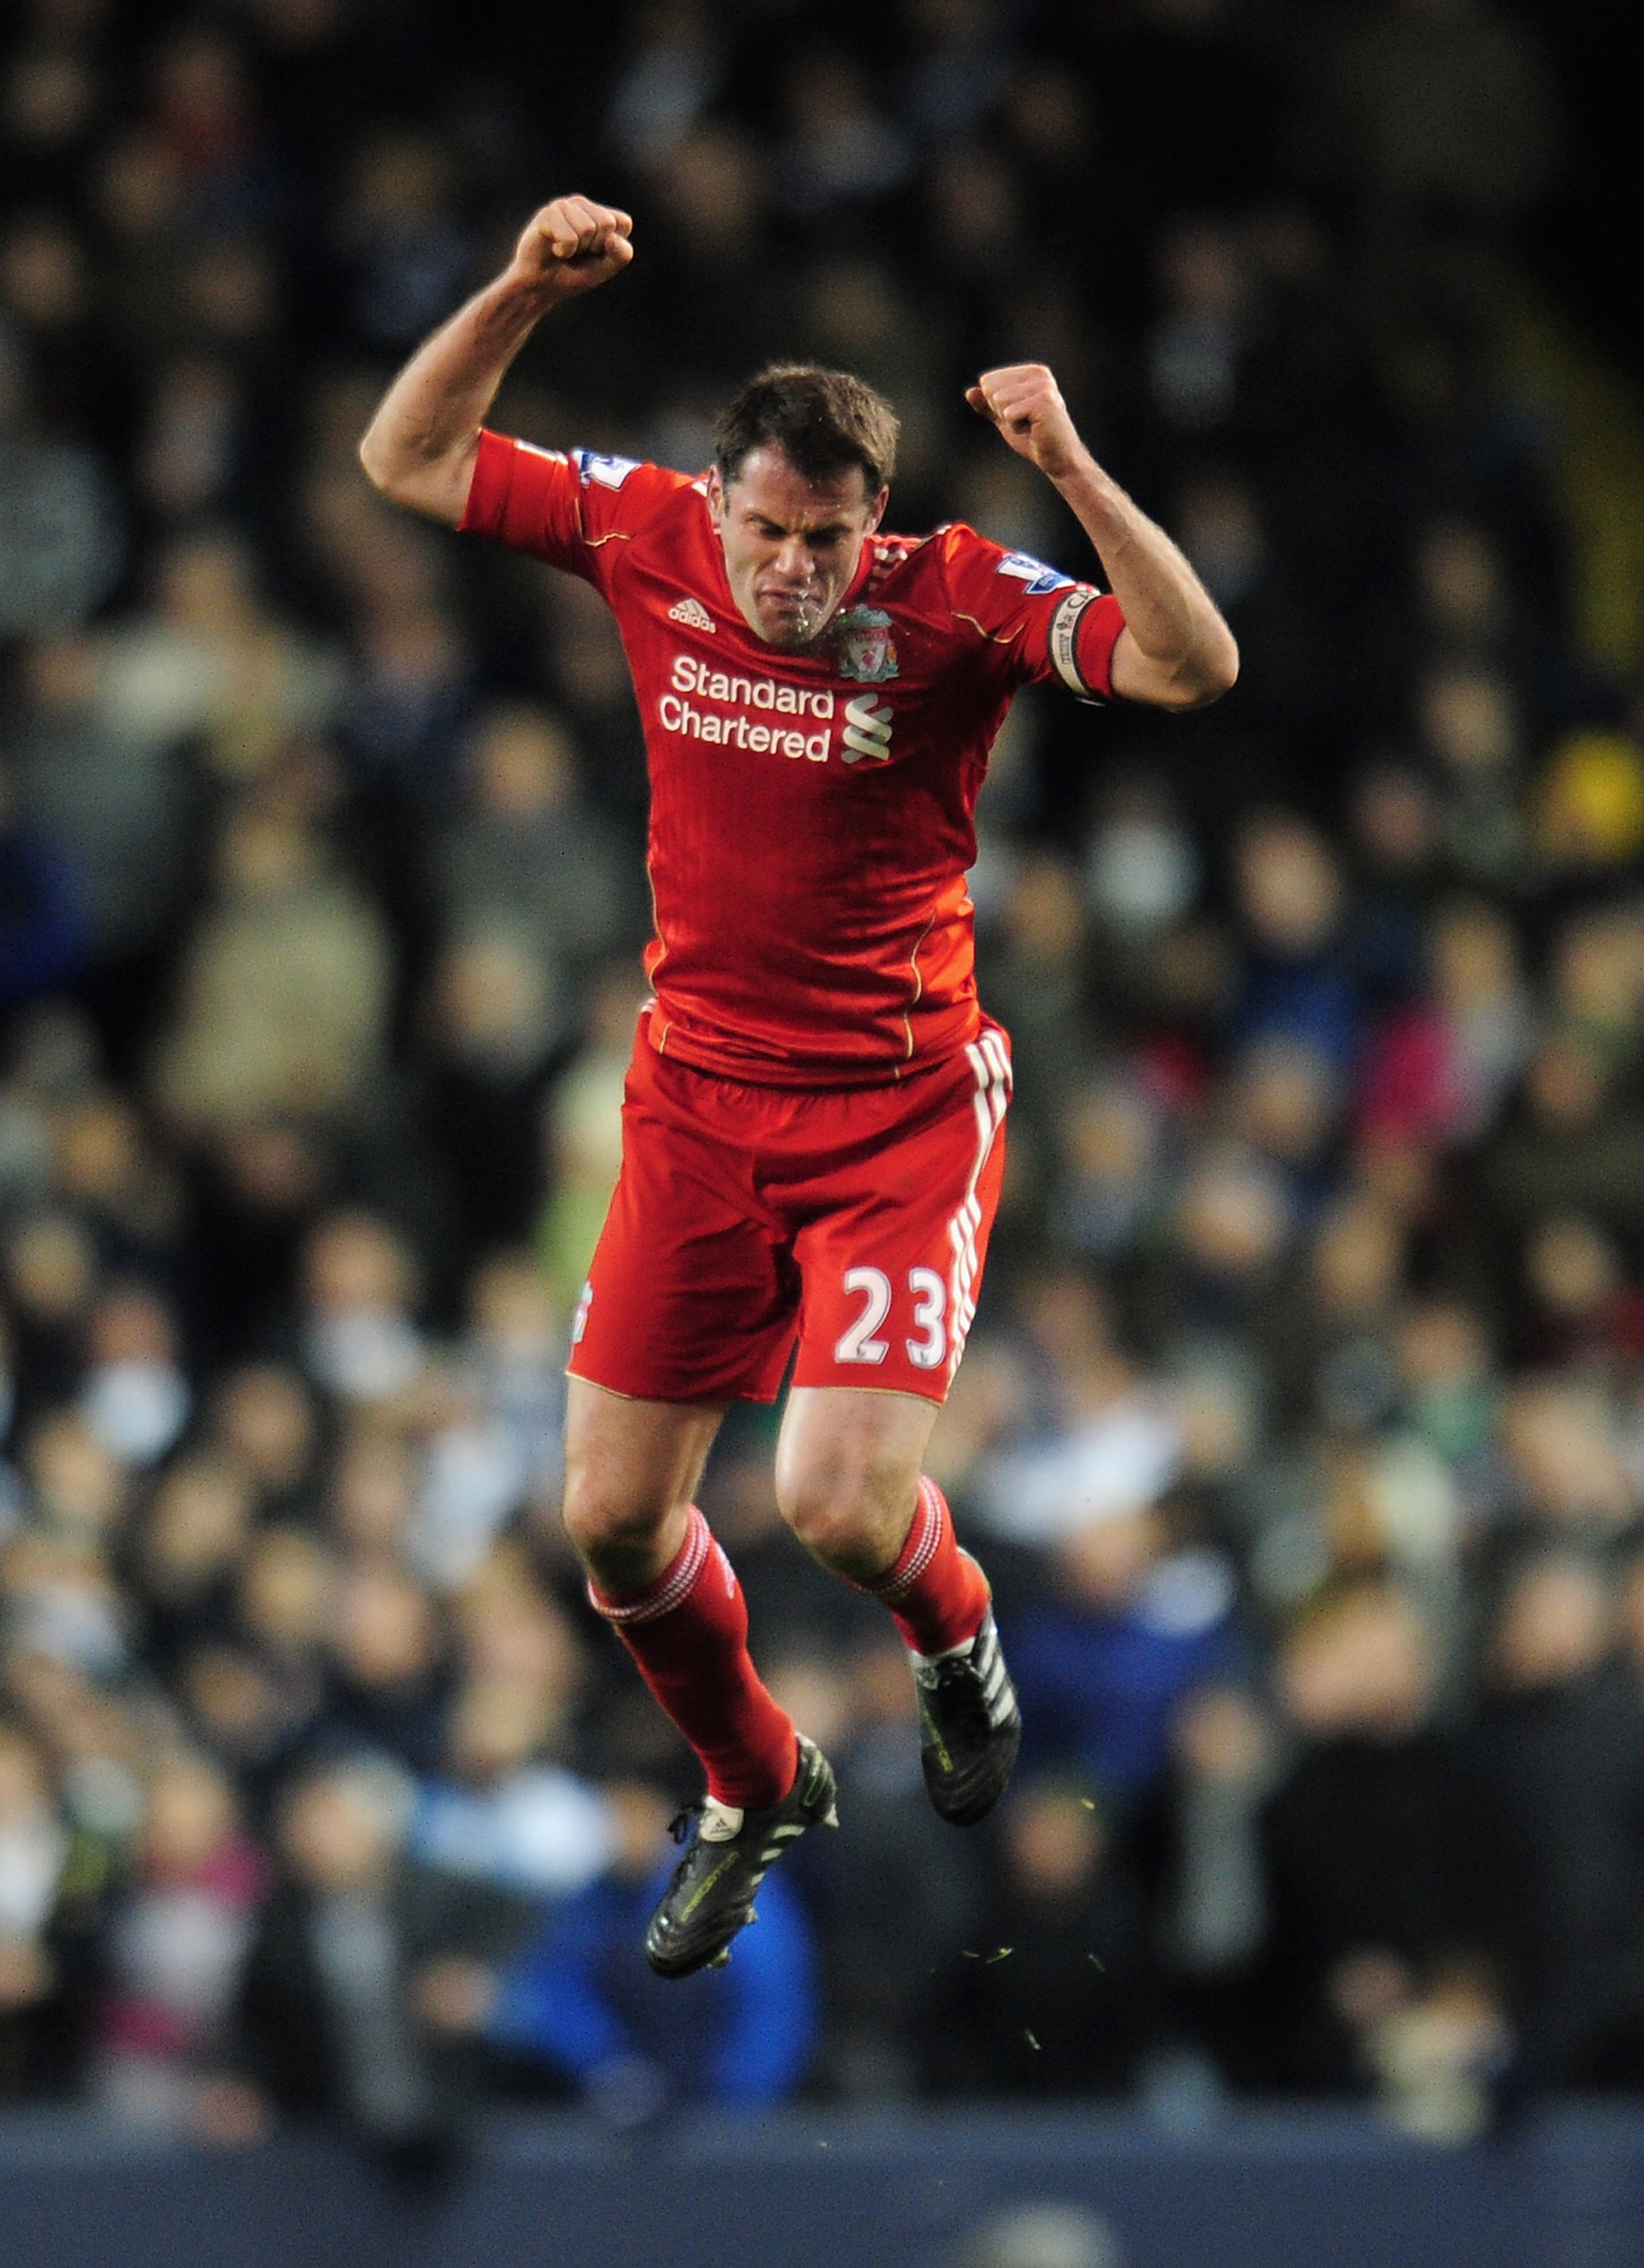 LONDON, ENGLAND - NOVEMBER 28:  Jamie Carragher of Liverpool reacts during the Barclays Premier League match between Tottenham Hotspur and Liverpool at White Hart Lane on November 28, 2010 in London, England.  (Photo by Shaun Botterill/Getty Images)